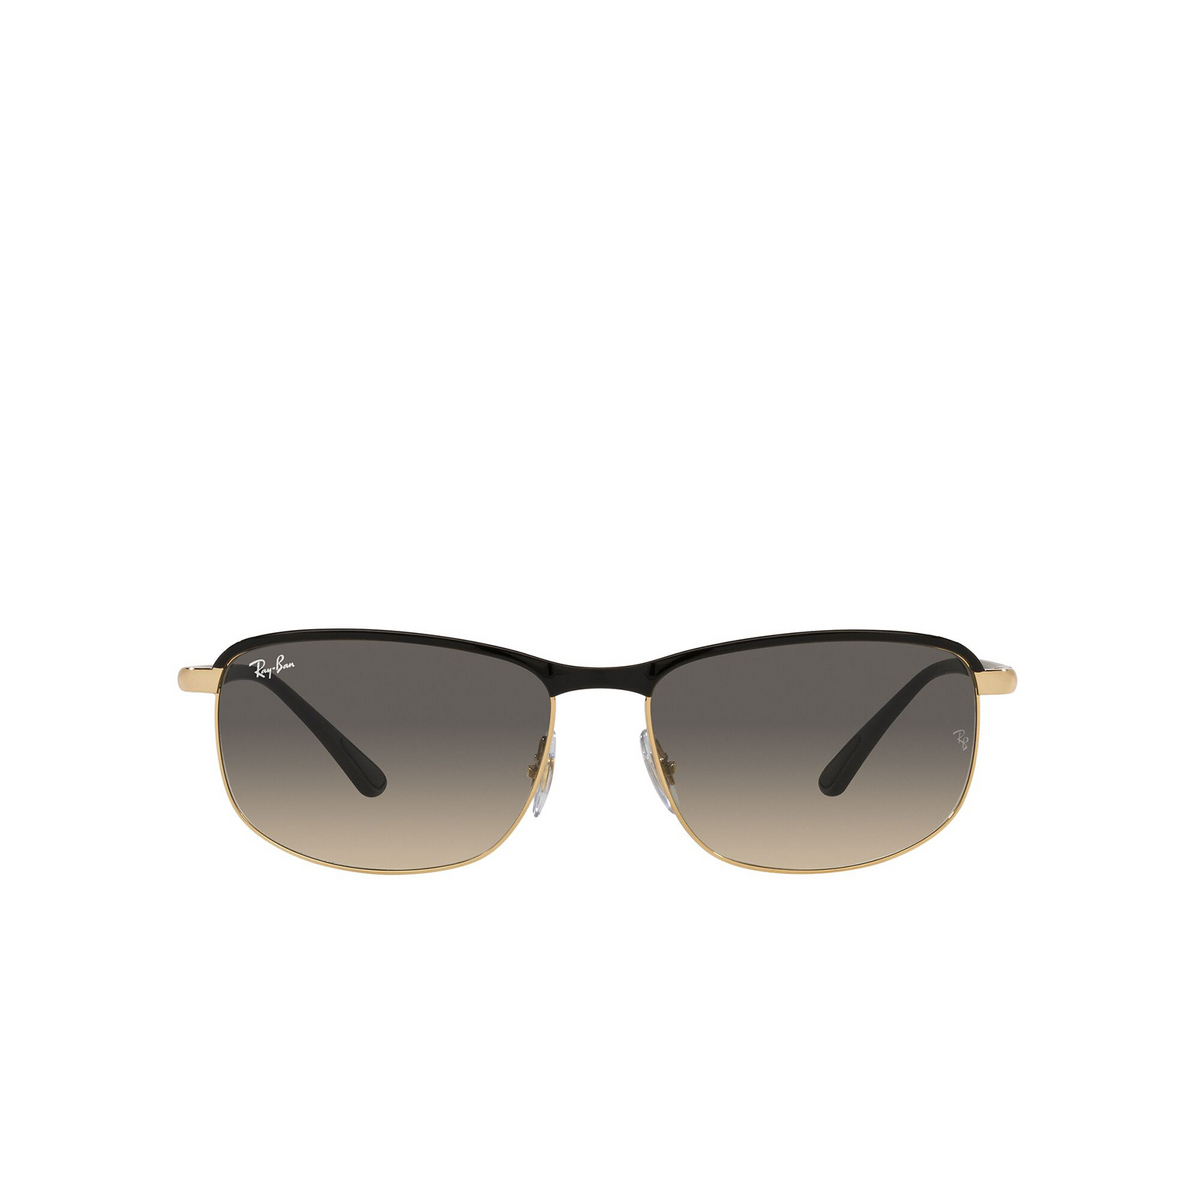 Ray-Ban® Square Sunglasses: RB3671 color Black On Arista 187/32 - front view.